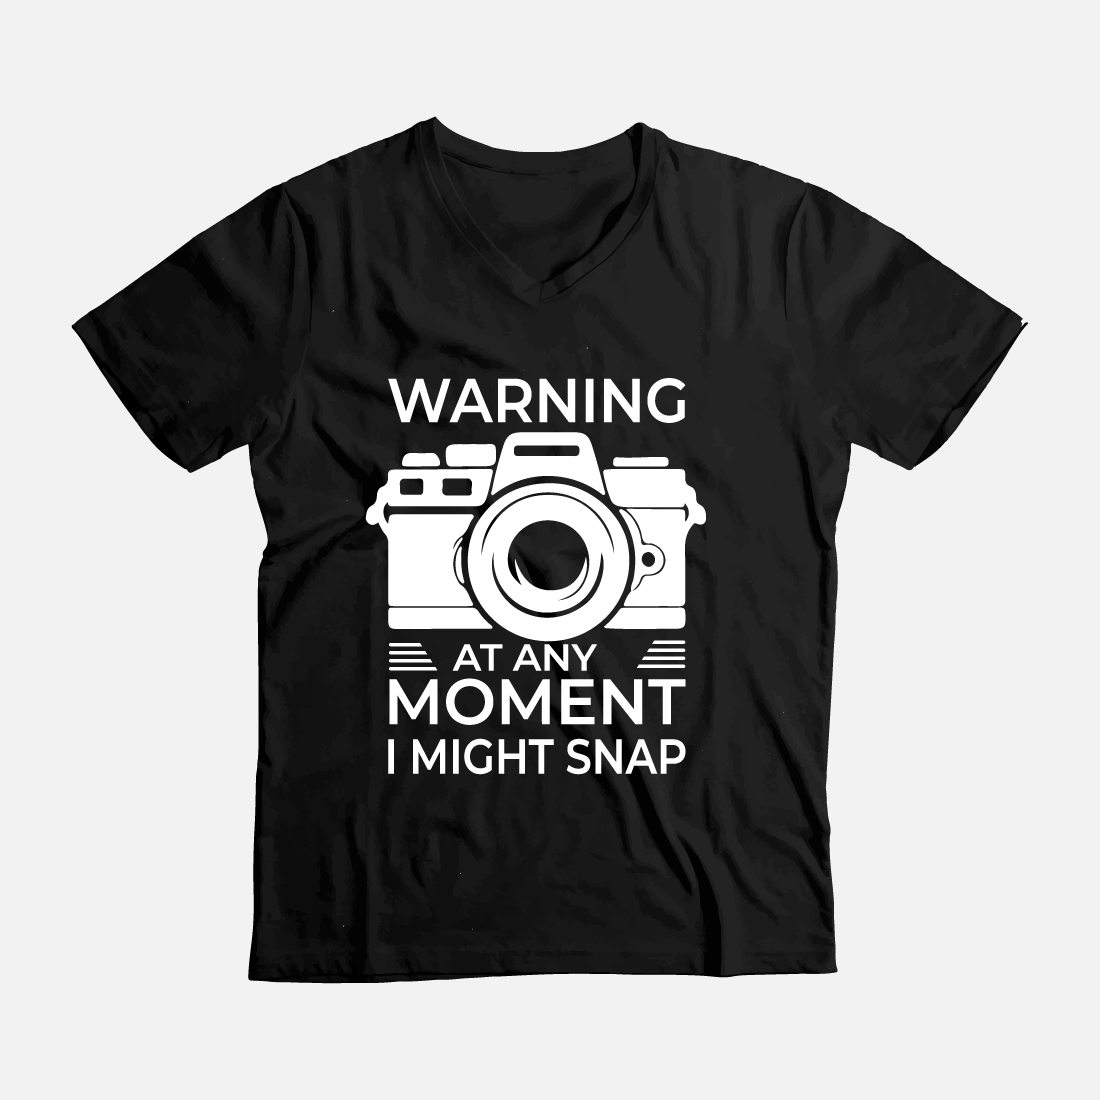 Warning At Any Moment I Might Snap Funny photographer t-shirt cover image.